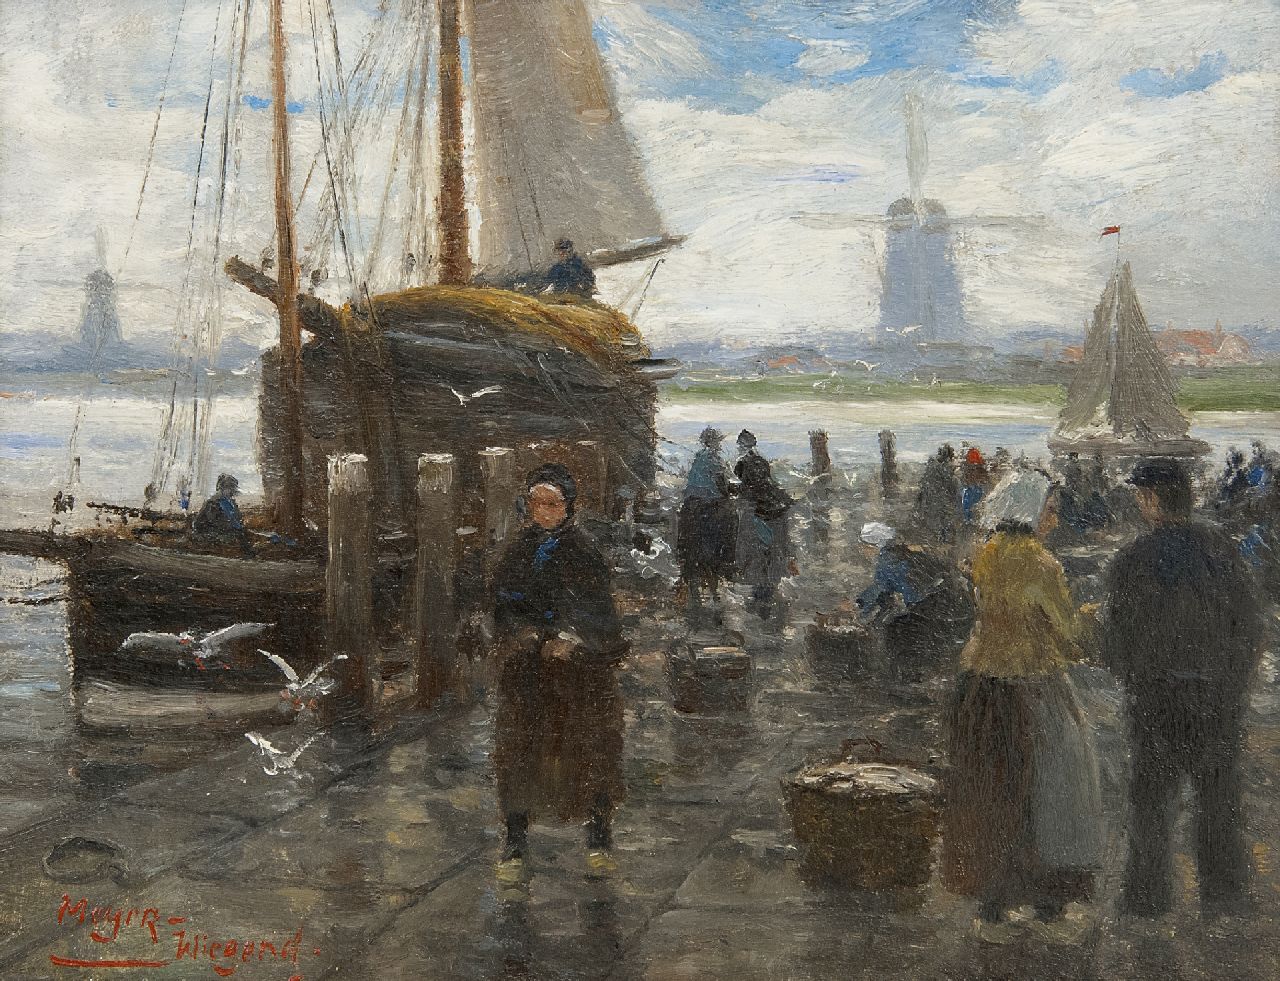 Meyer-Wiegand R.D.  | Rolf Dieter Meyer-Wiegand | Paintings offered for sale | Fishmarket on a quay, Holland, oil on panel 13.9 x 17.9 cm, signed l.l.